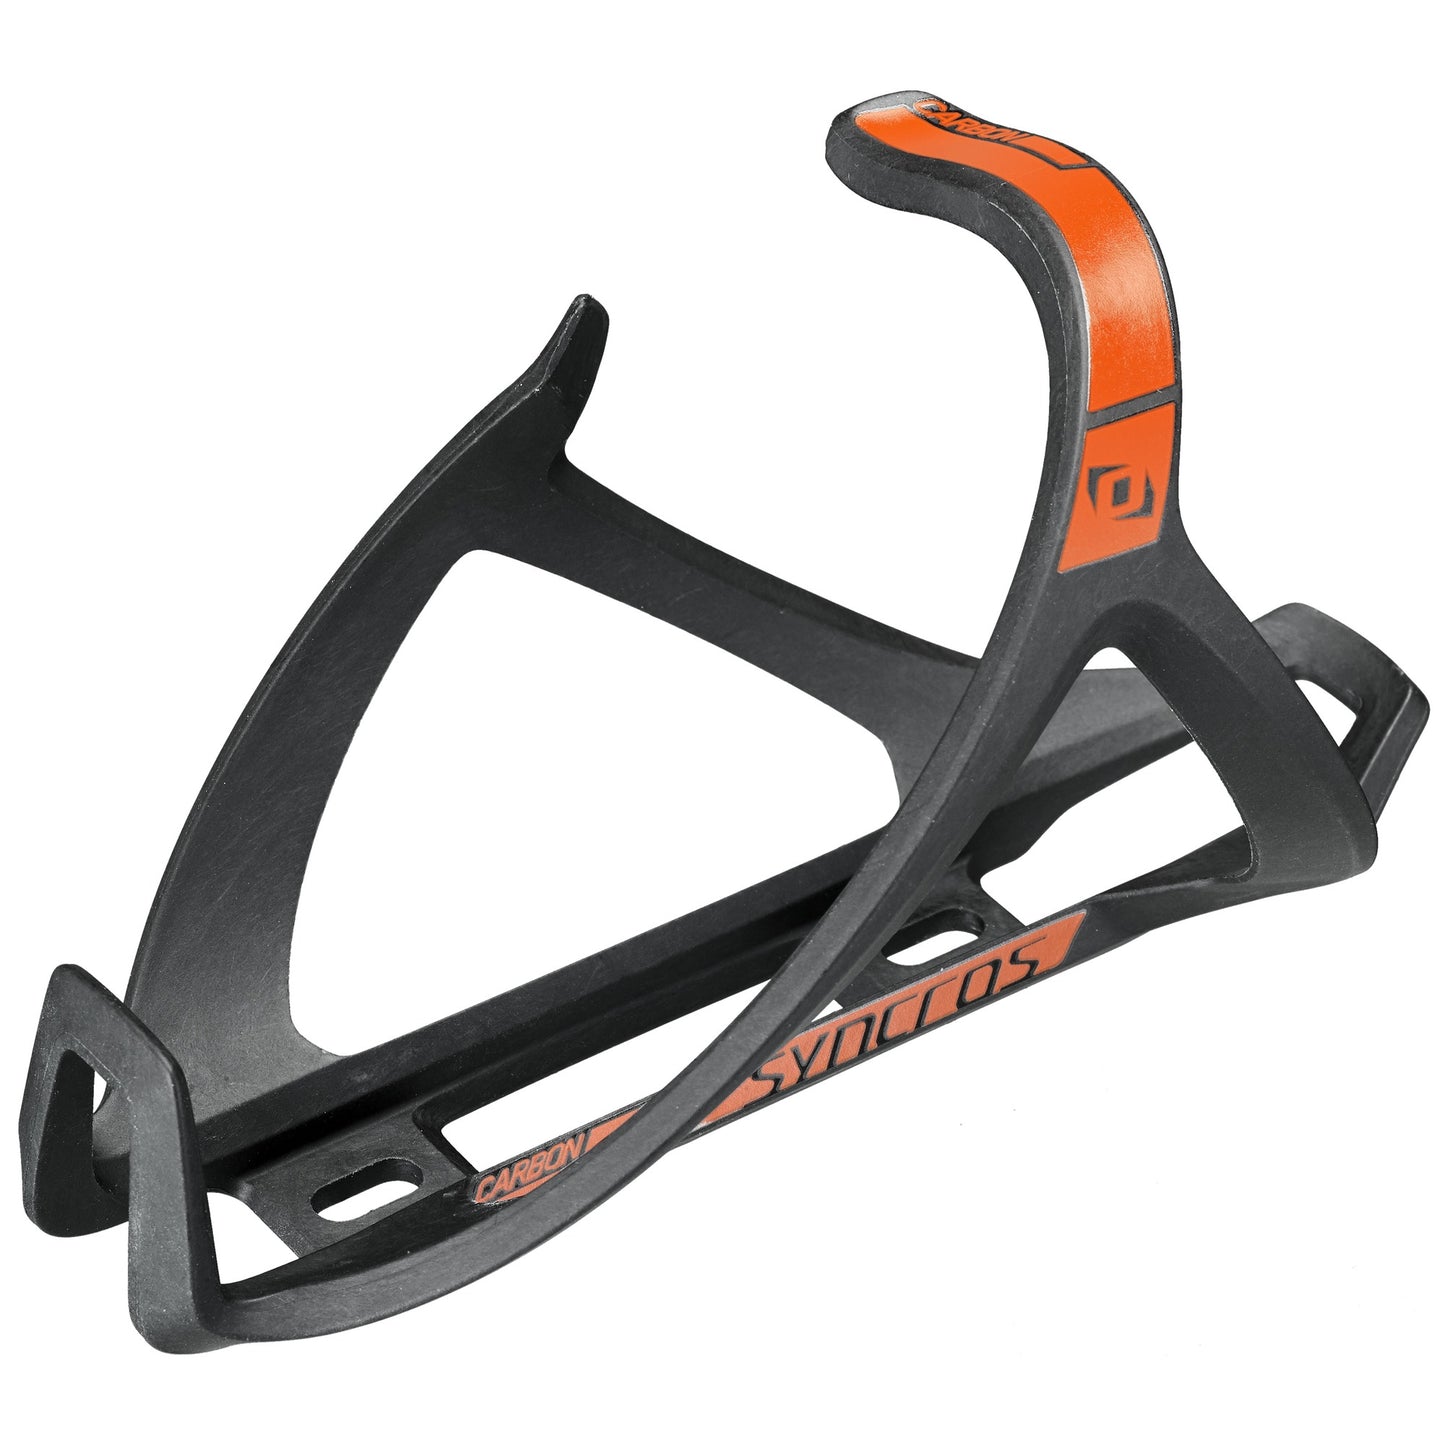 Syncros Bottle Cage Tailor cage 1.0 left